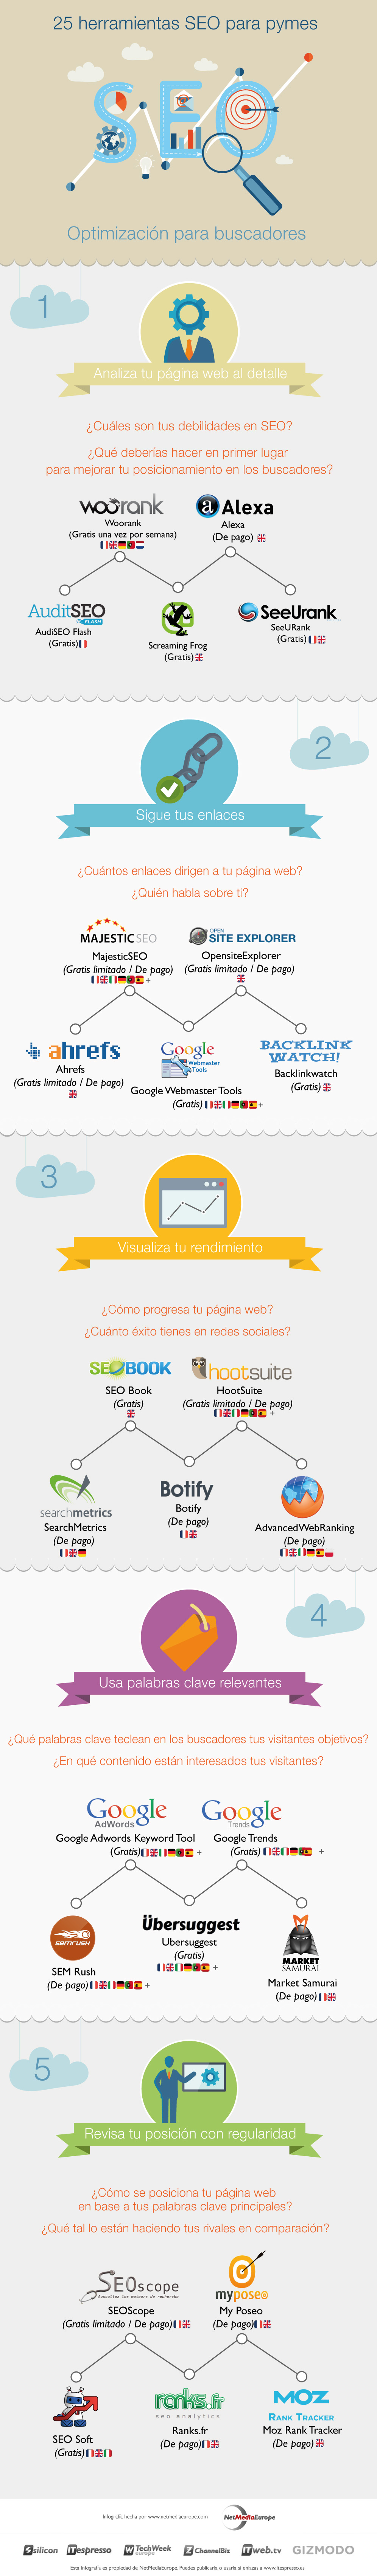 infographie_25outils_seo_ES